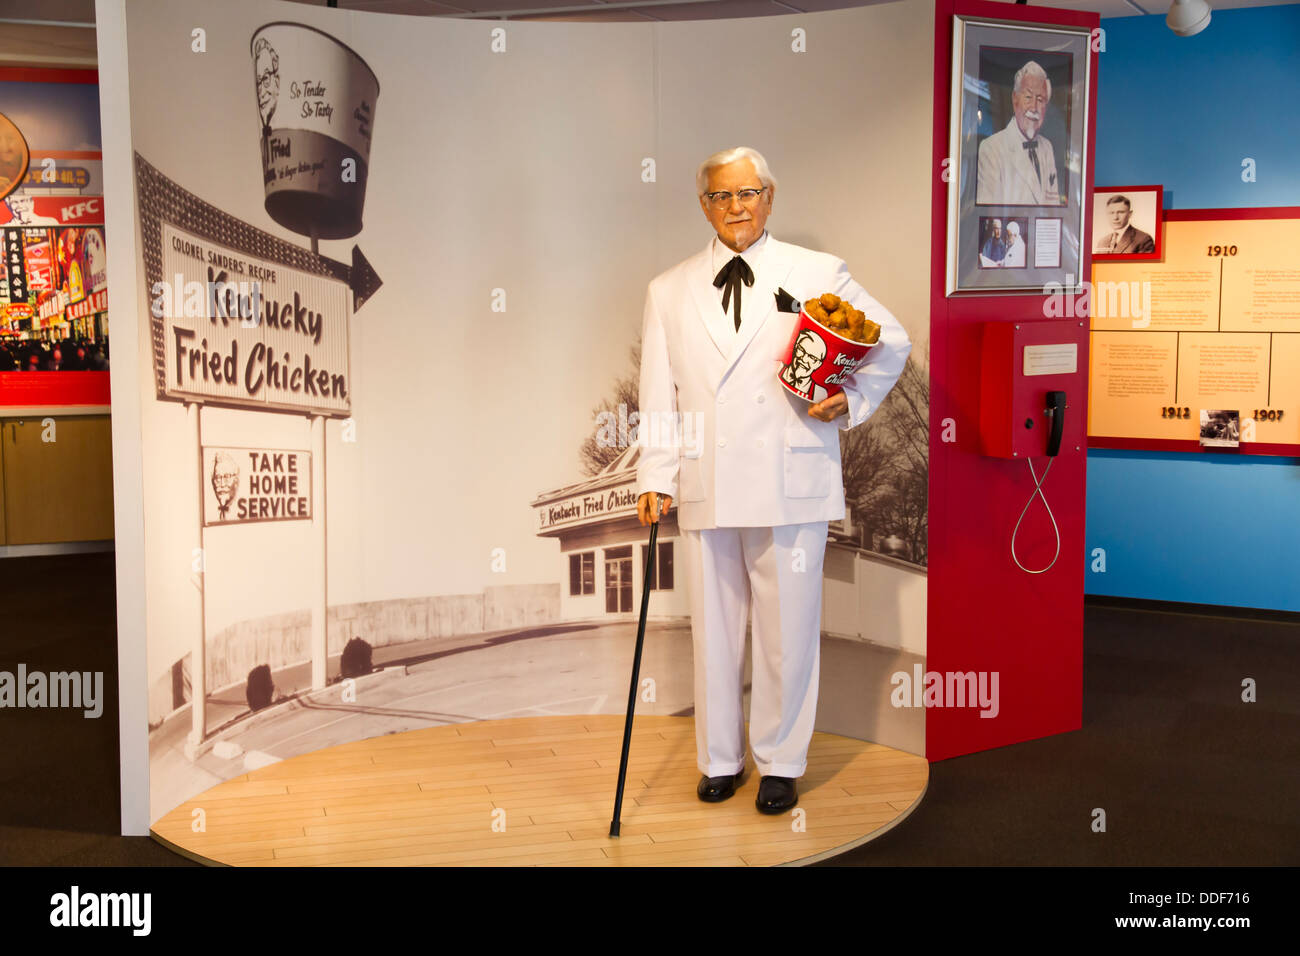 A tribute to Colonel Harland David Sanders founder of KFC Kentucky Fried Chicken Louisville Kentucky KY, USA Stock Photo